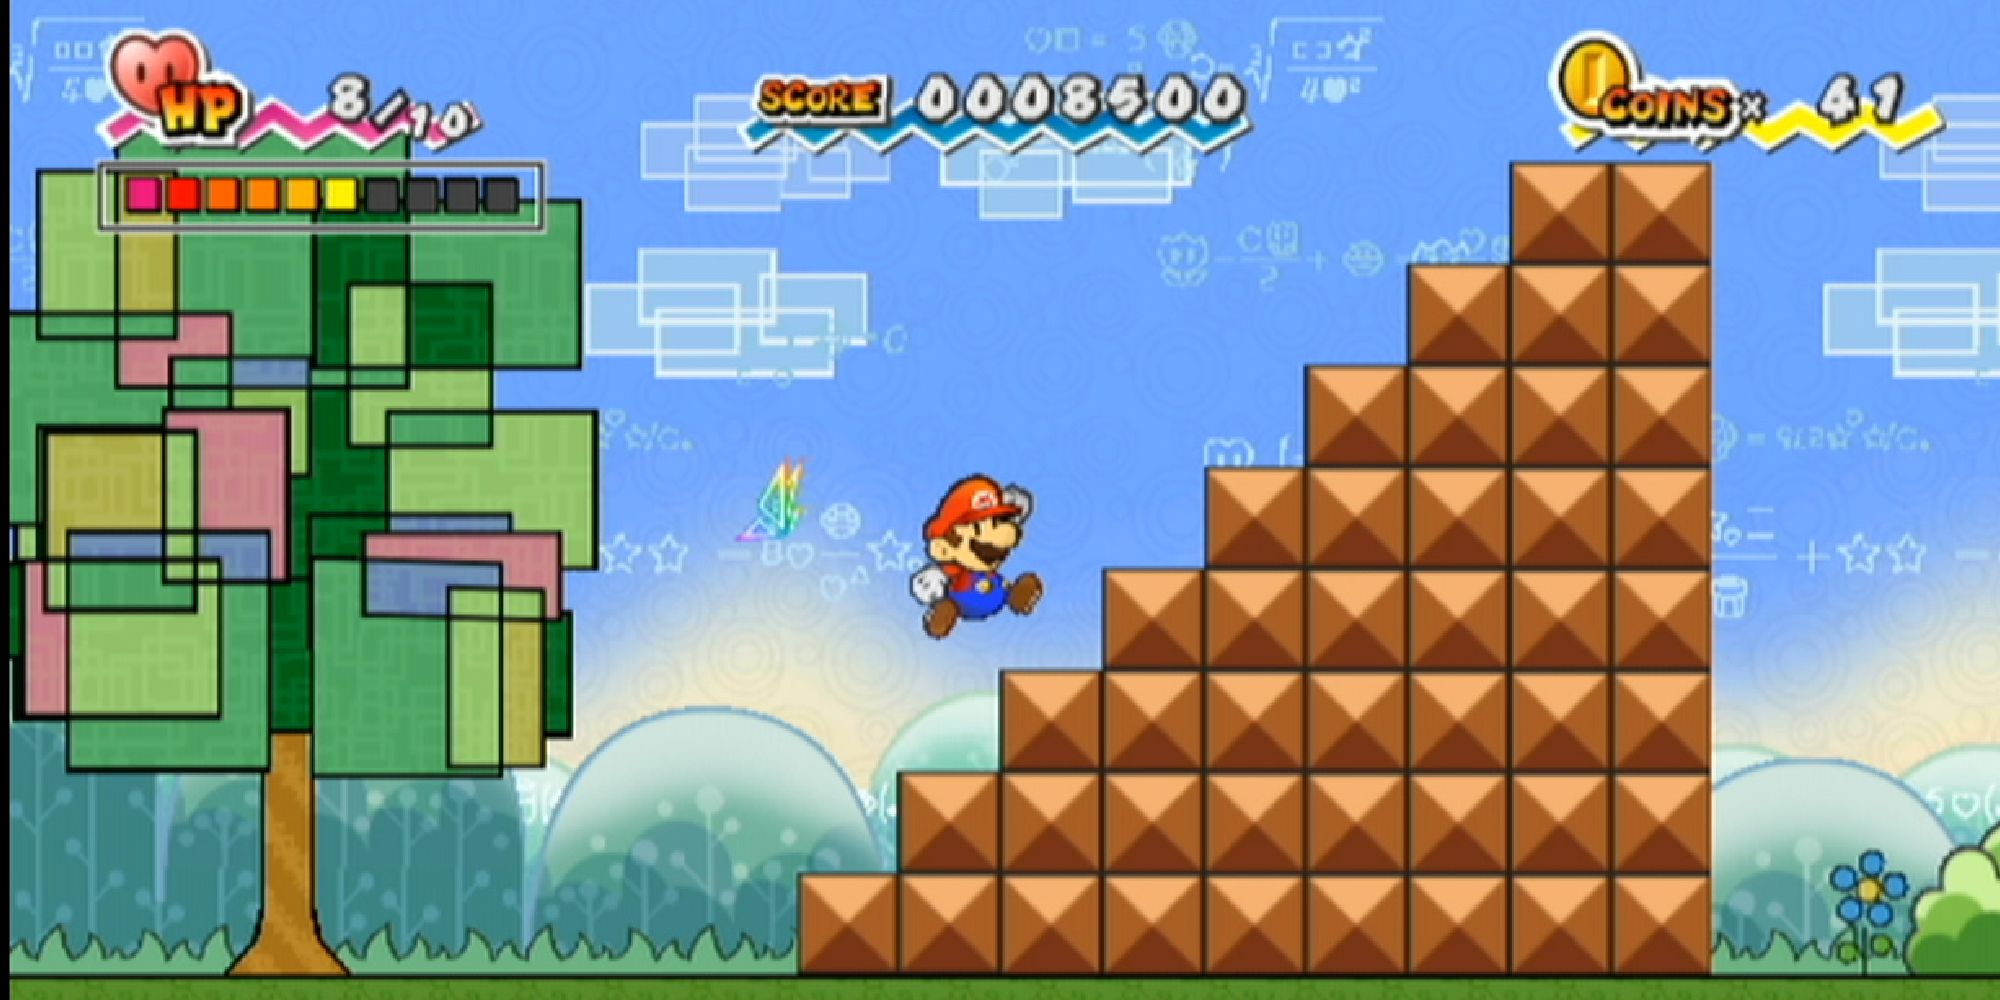 Screenshot from Super Paper Mario, seeing him jump in a platform level typical of Maril 